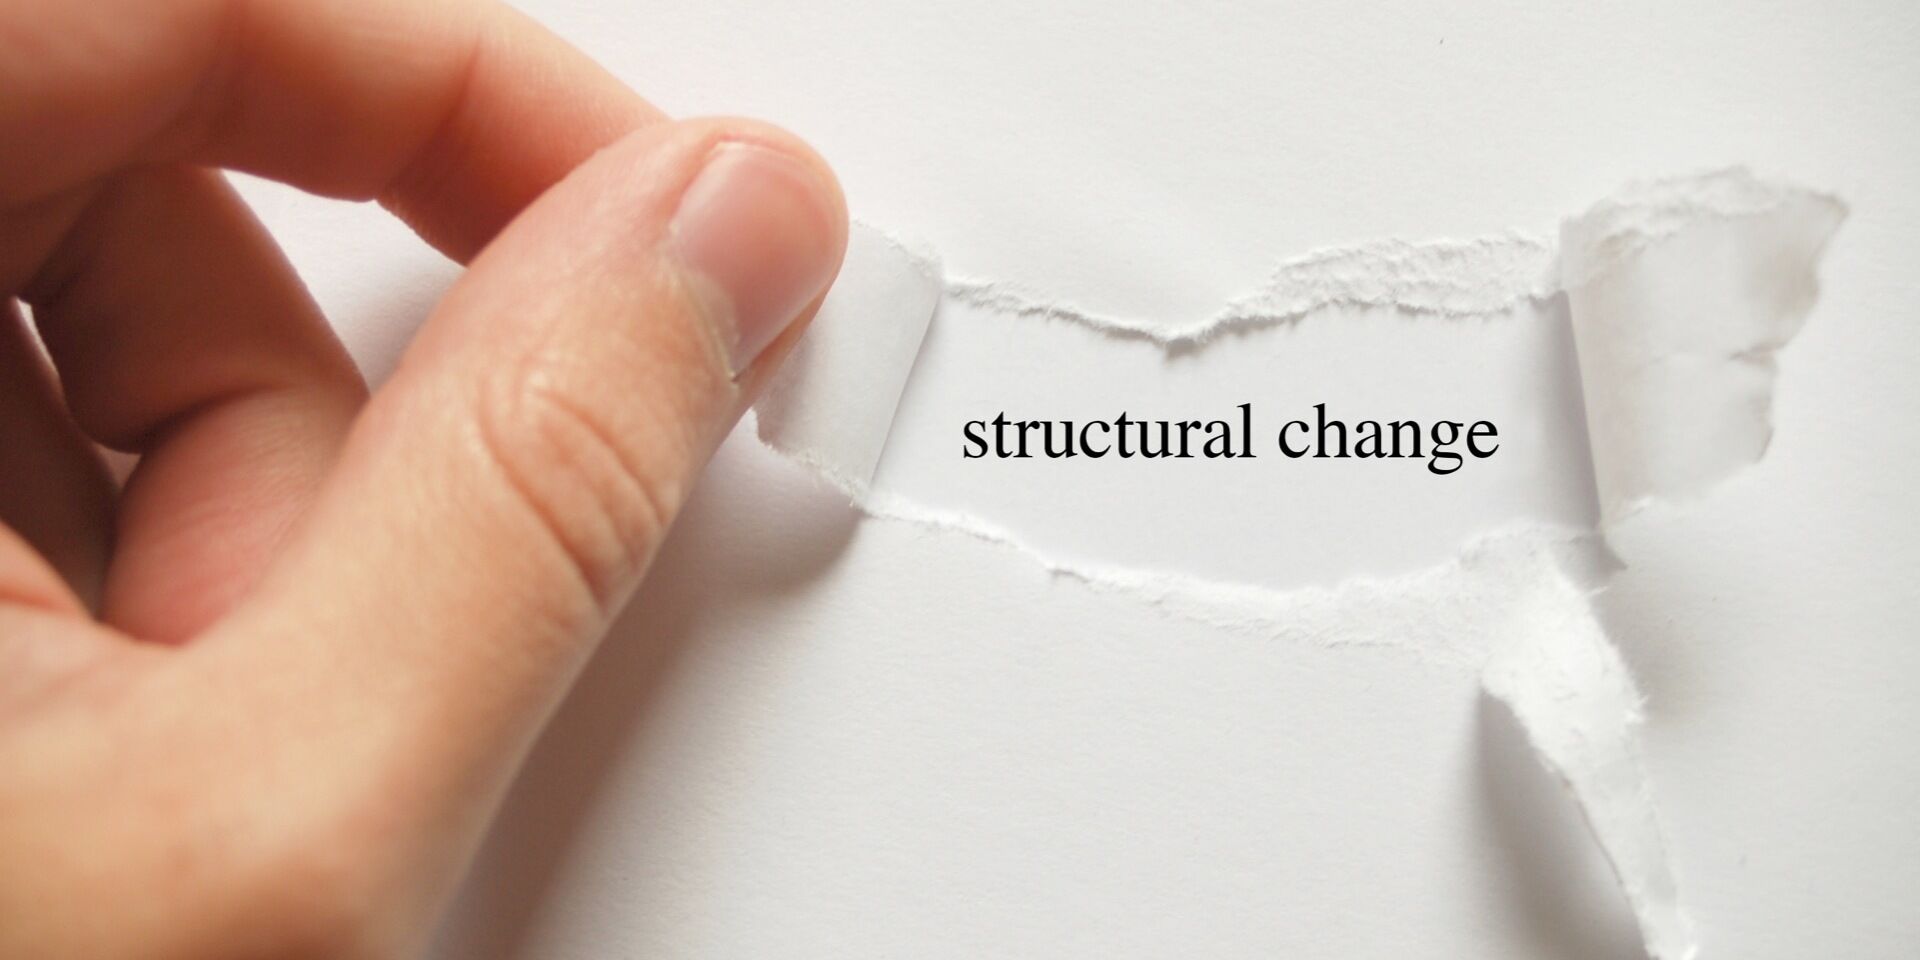 Speeding up the structural change? – An interjection!